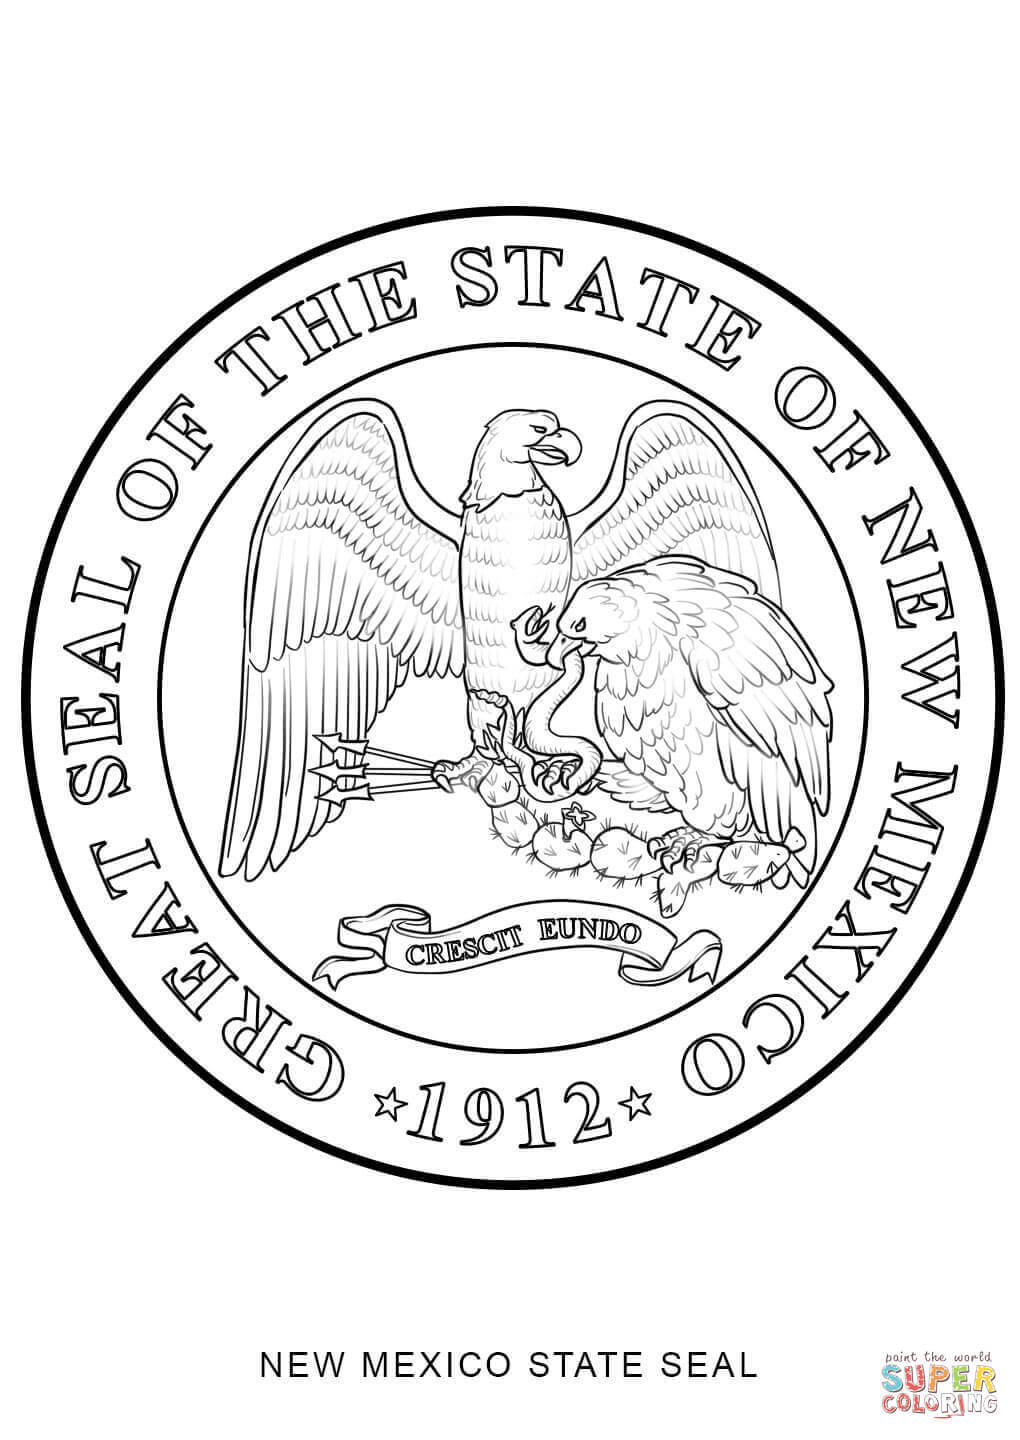 New Mexico State Seal coloring page | Free Printable Coloring Pages